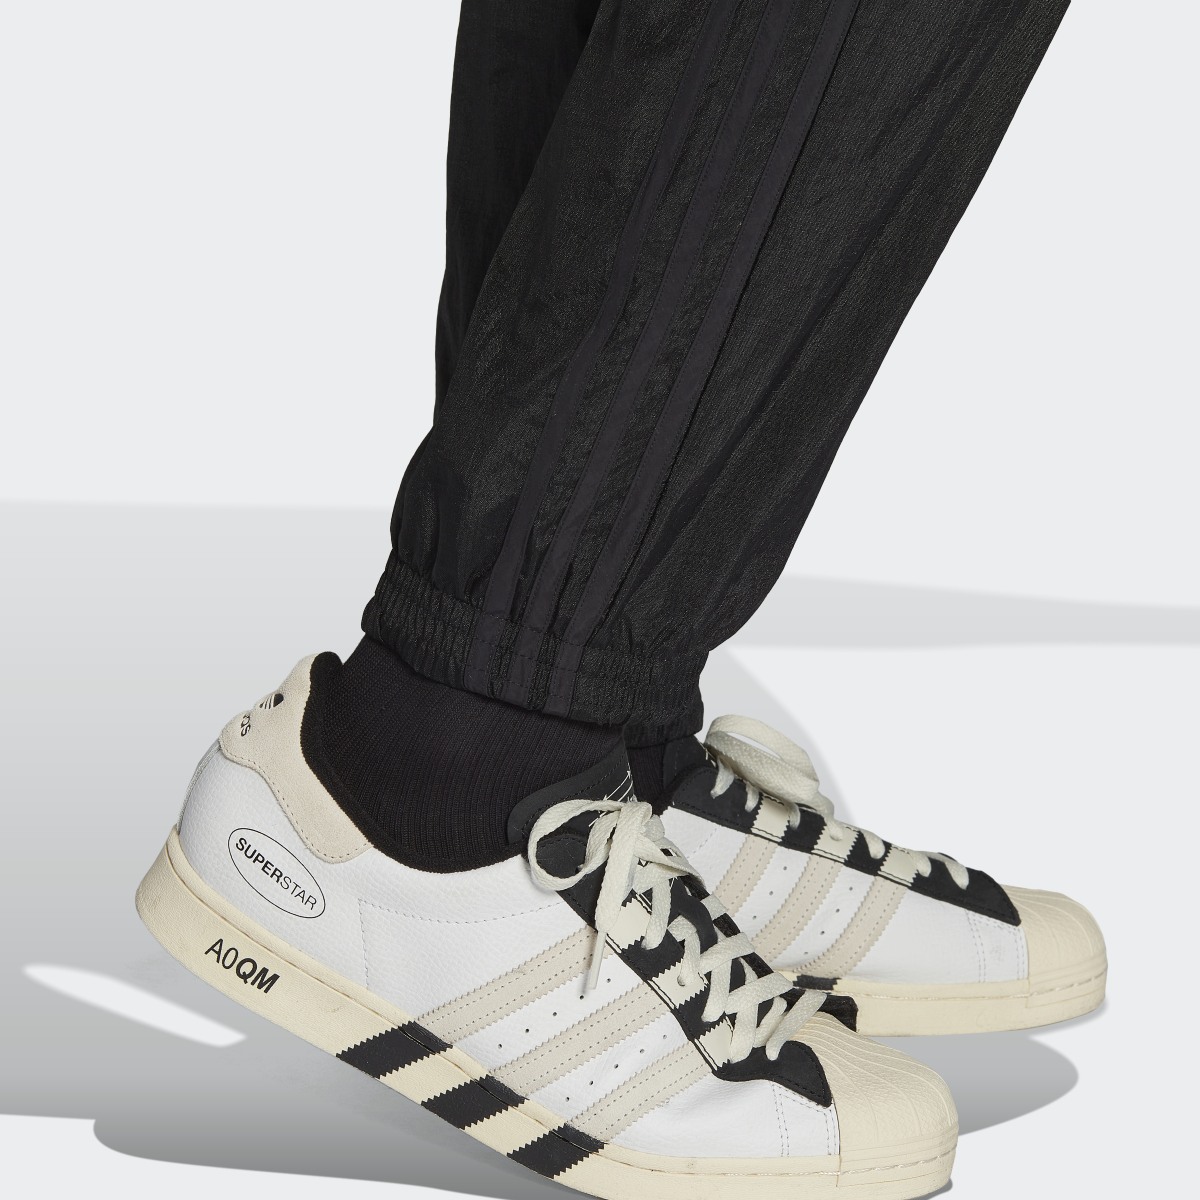 Adidas Reveal Material Mix Track Pants. 5